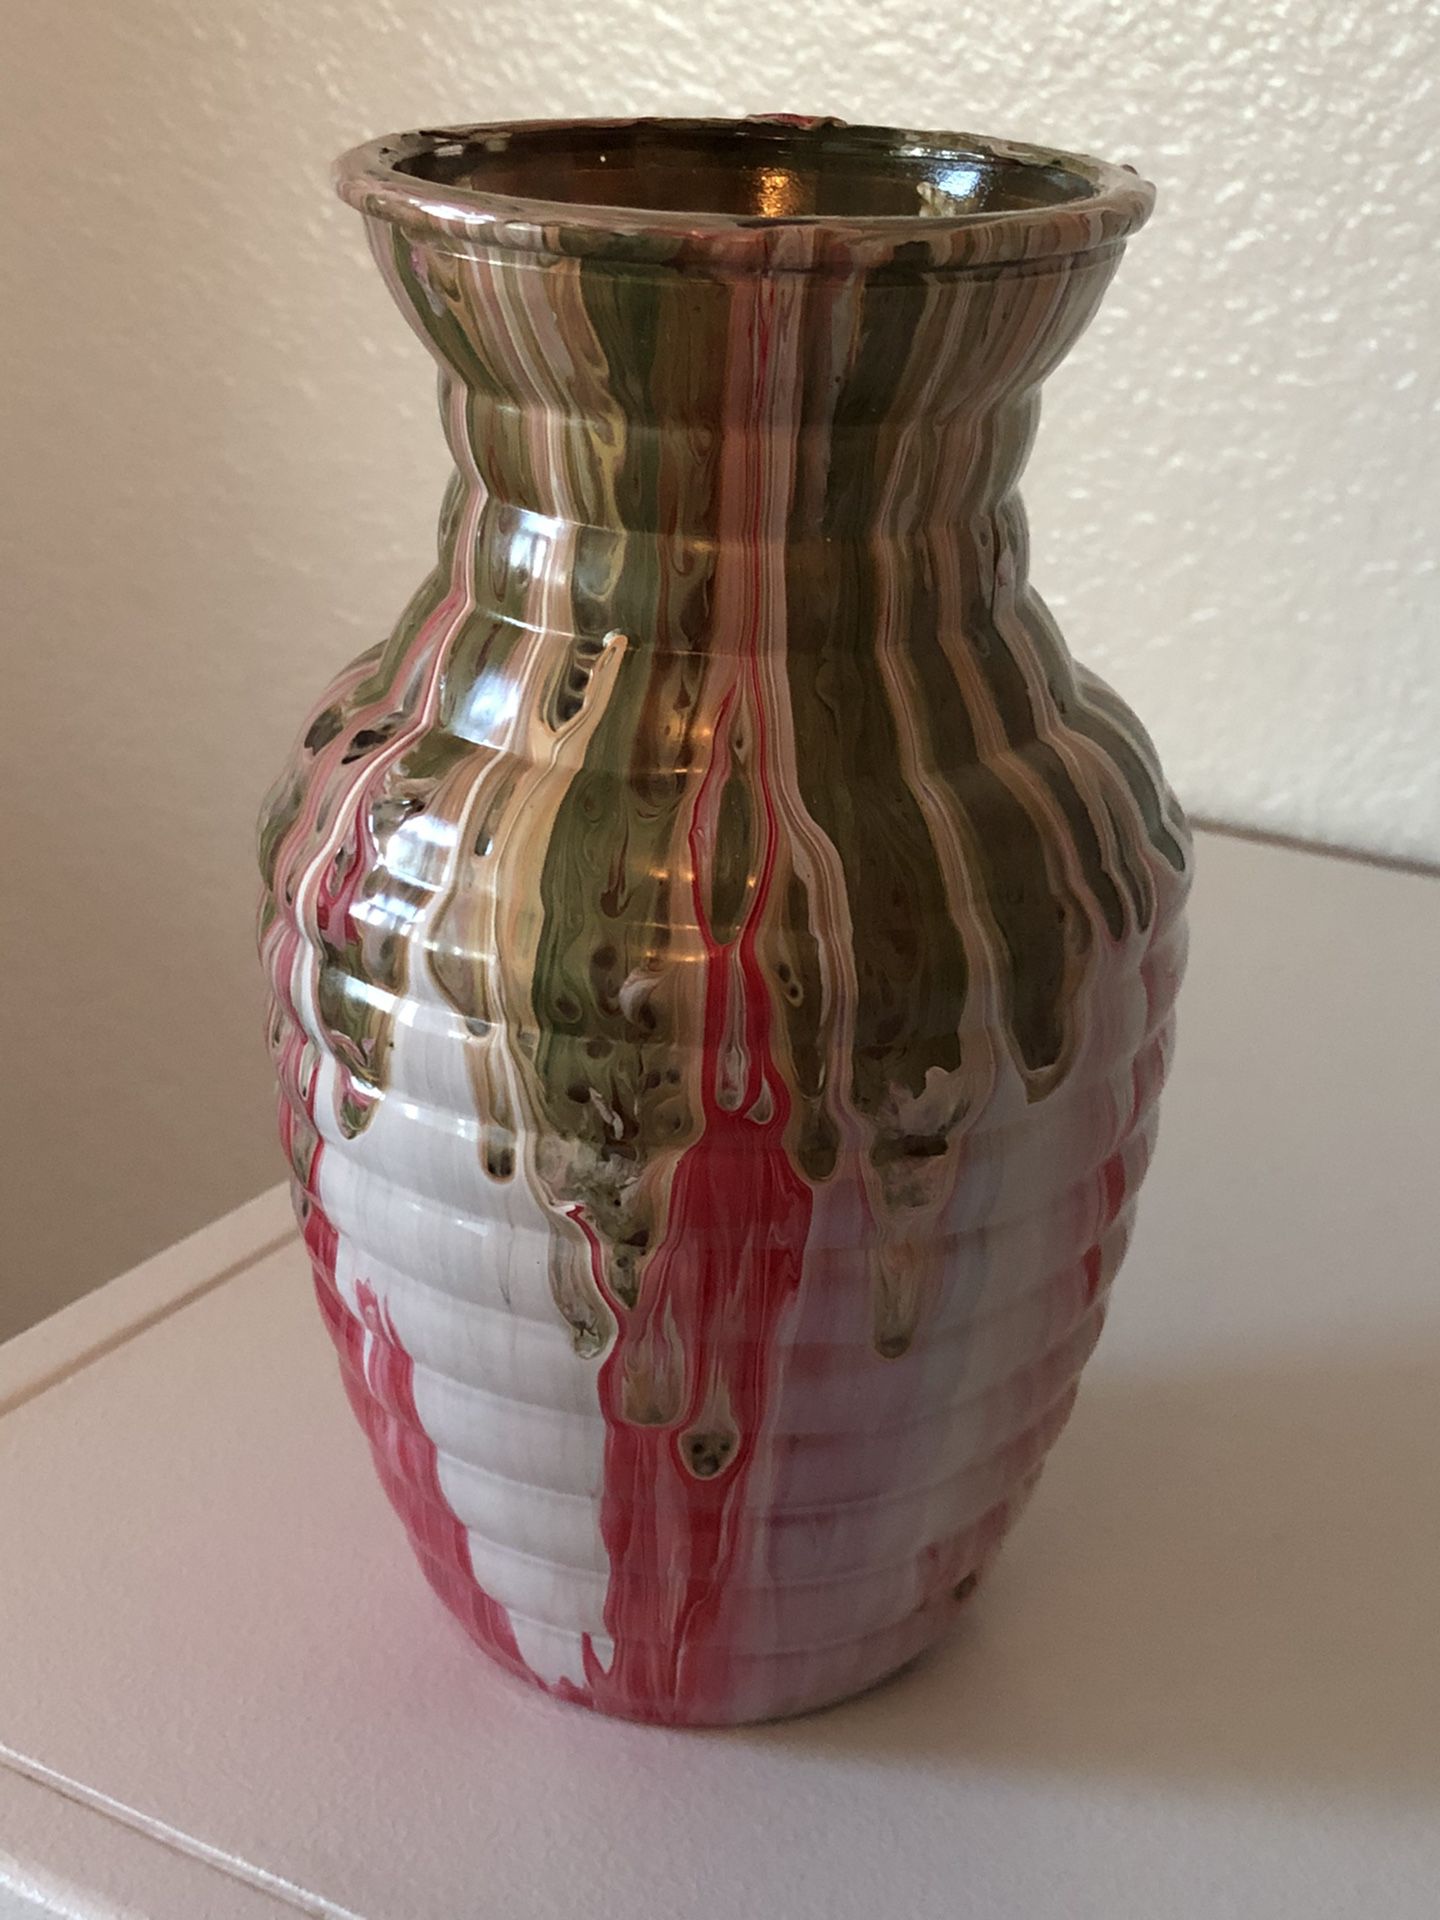 New Glass Acrylic Painted Vase: 8” Tall